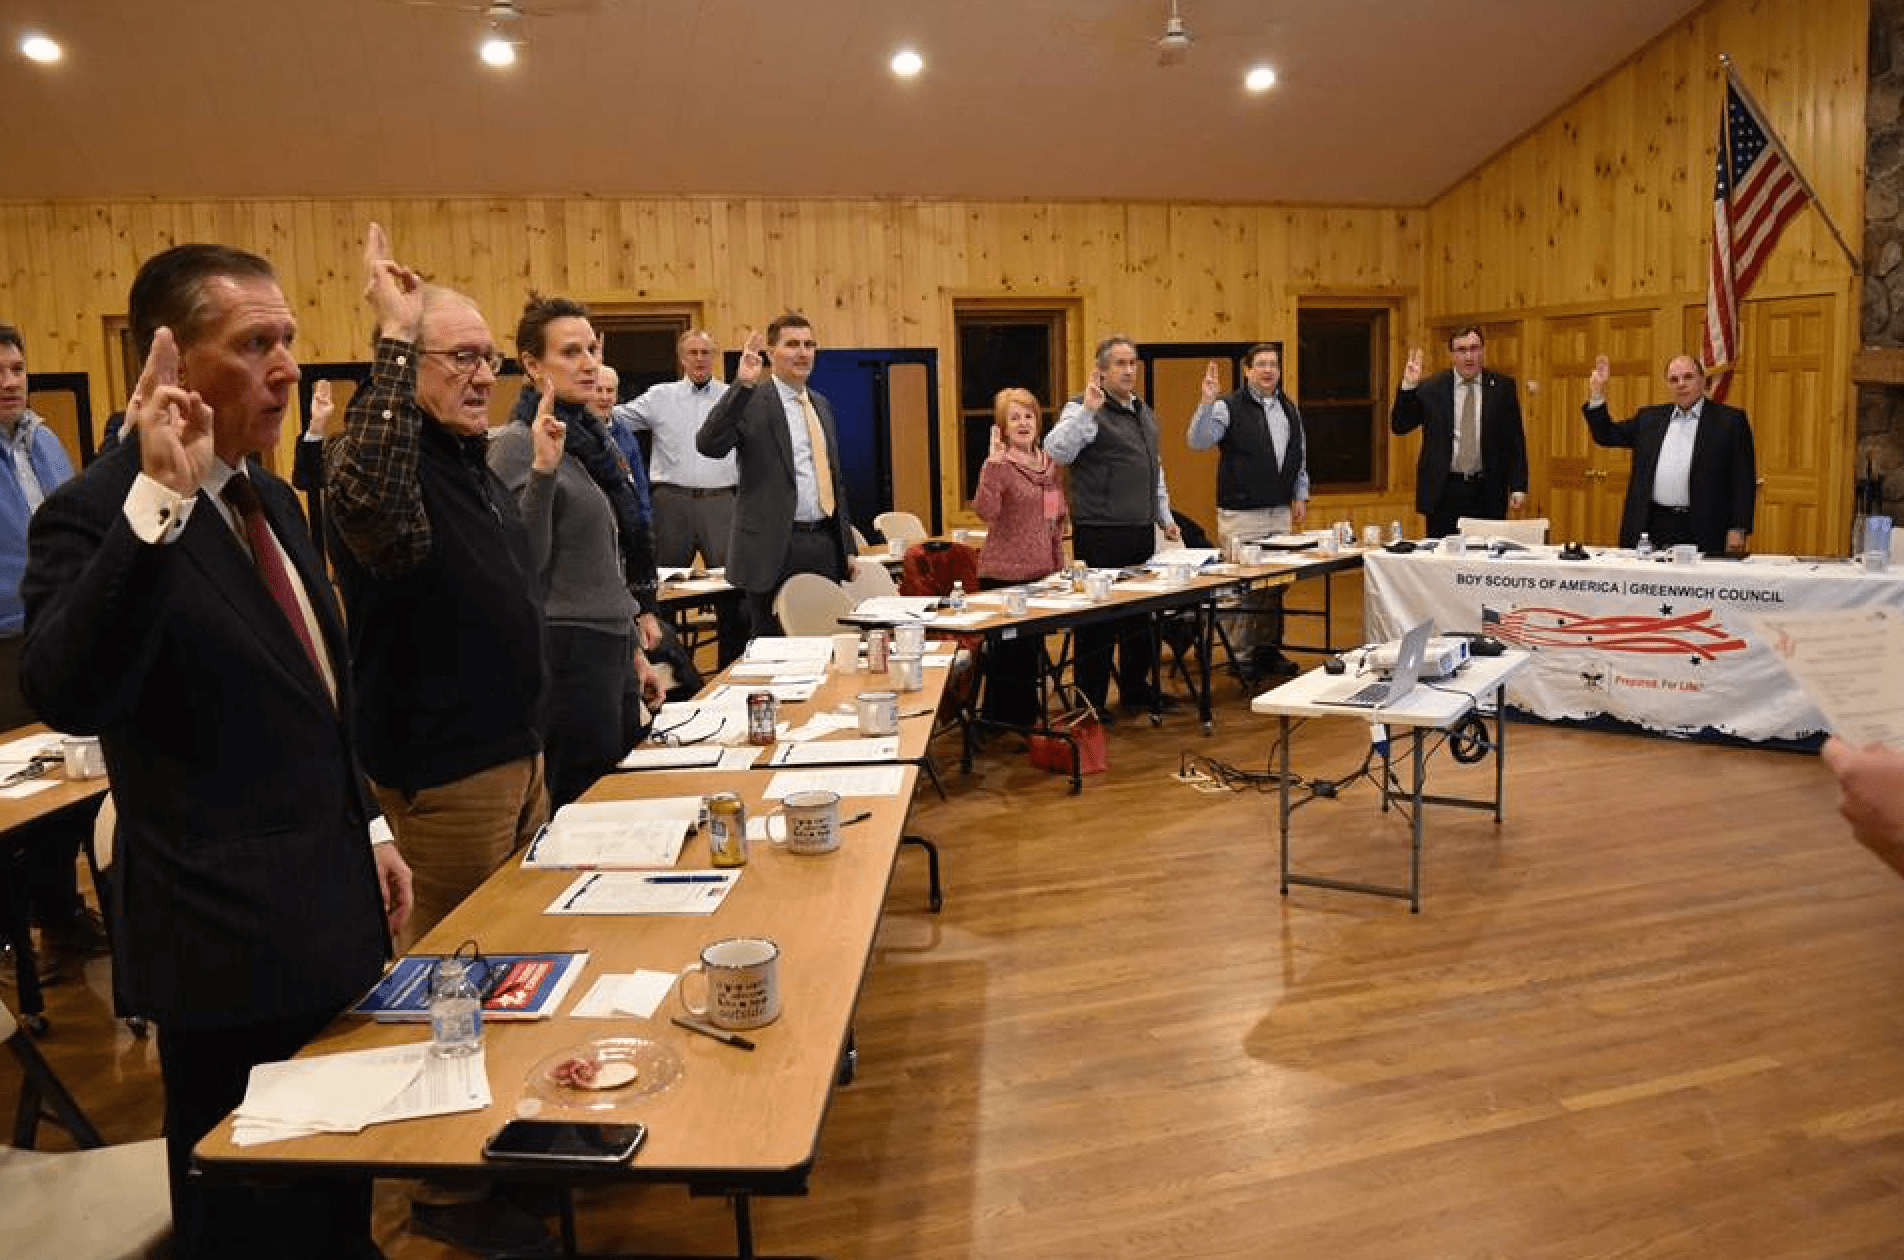 The Greenwich Council, BSA's annual business meeting took place at the Malcolm Pray Memorial Building at Seton Scout Reservation in Greenwich.